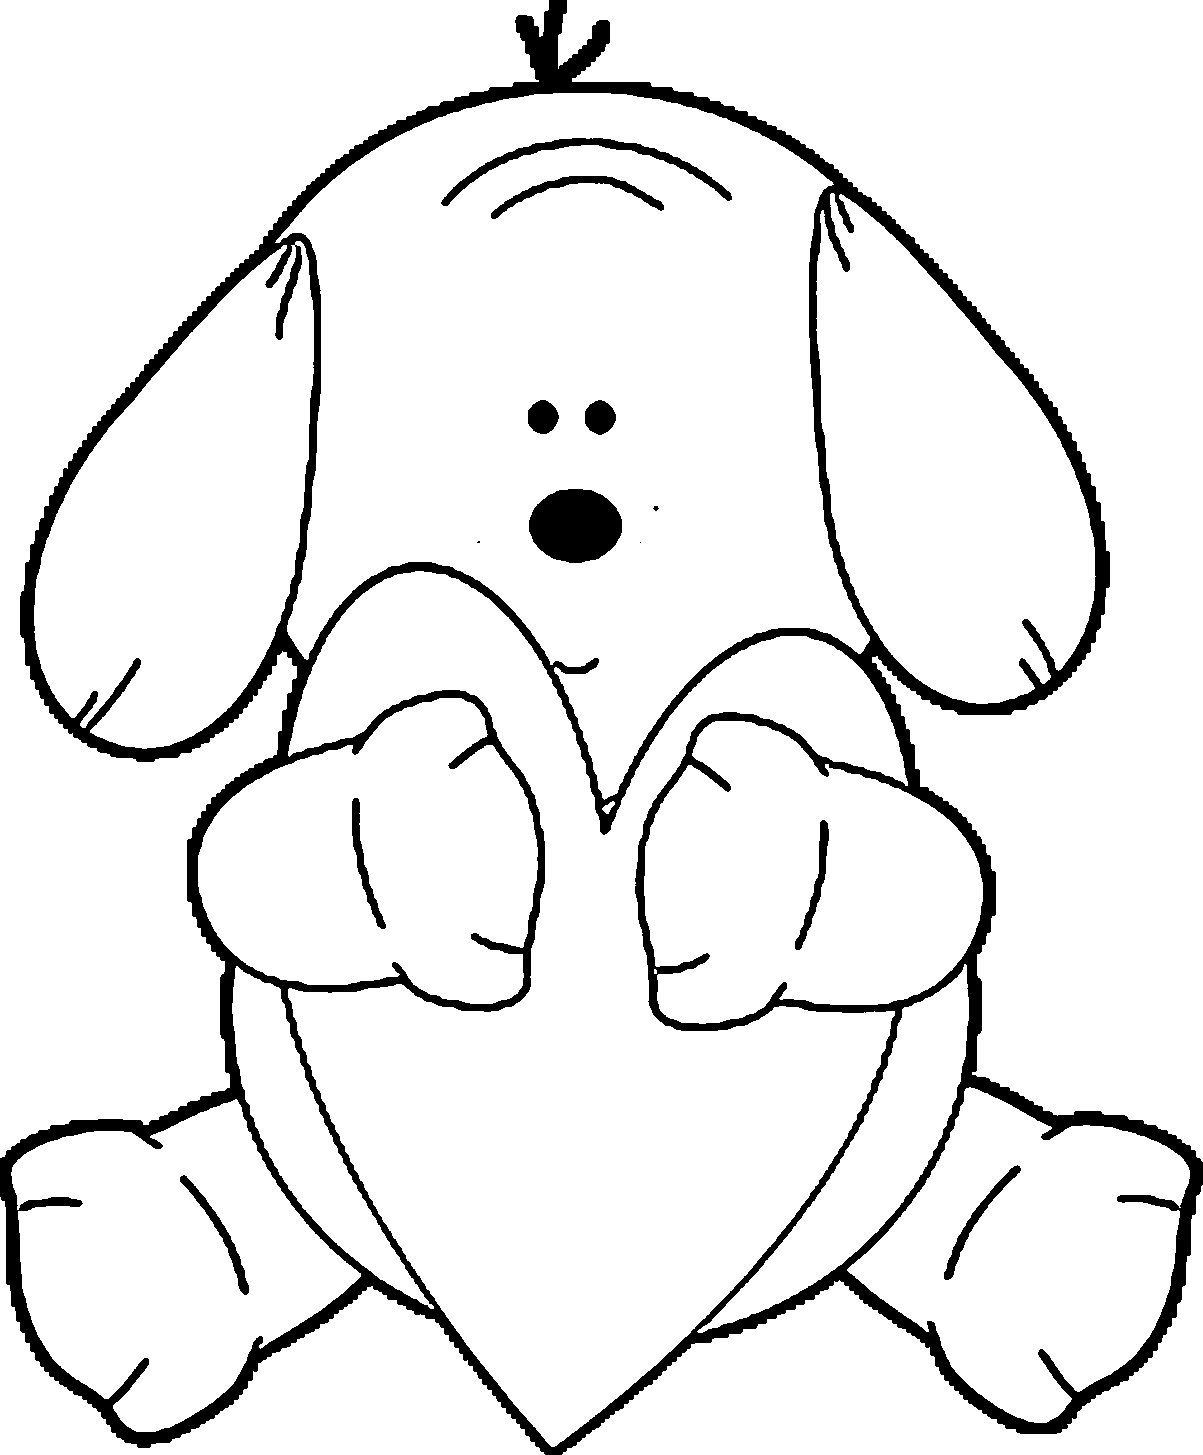 Puppy Hugging Heart Dog Puppy Coloring Page | Wecoloringpage